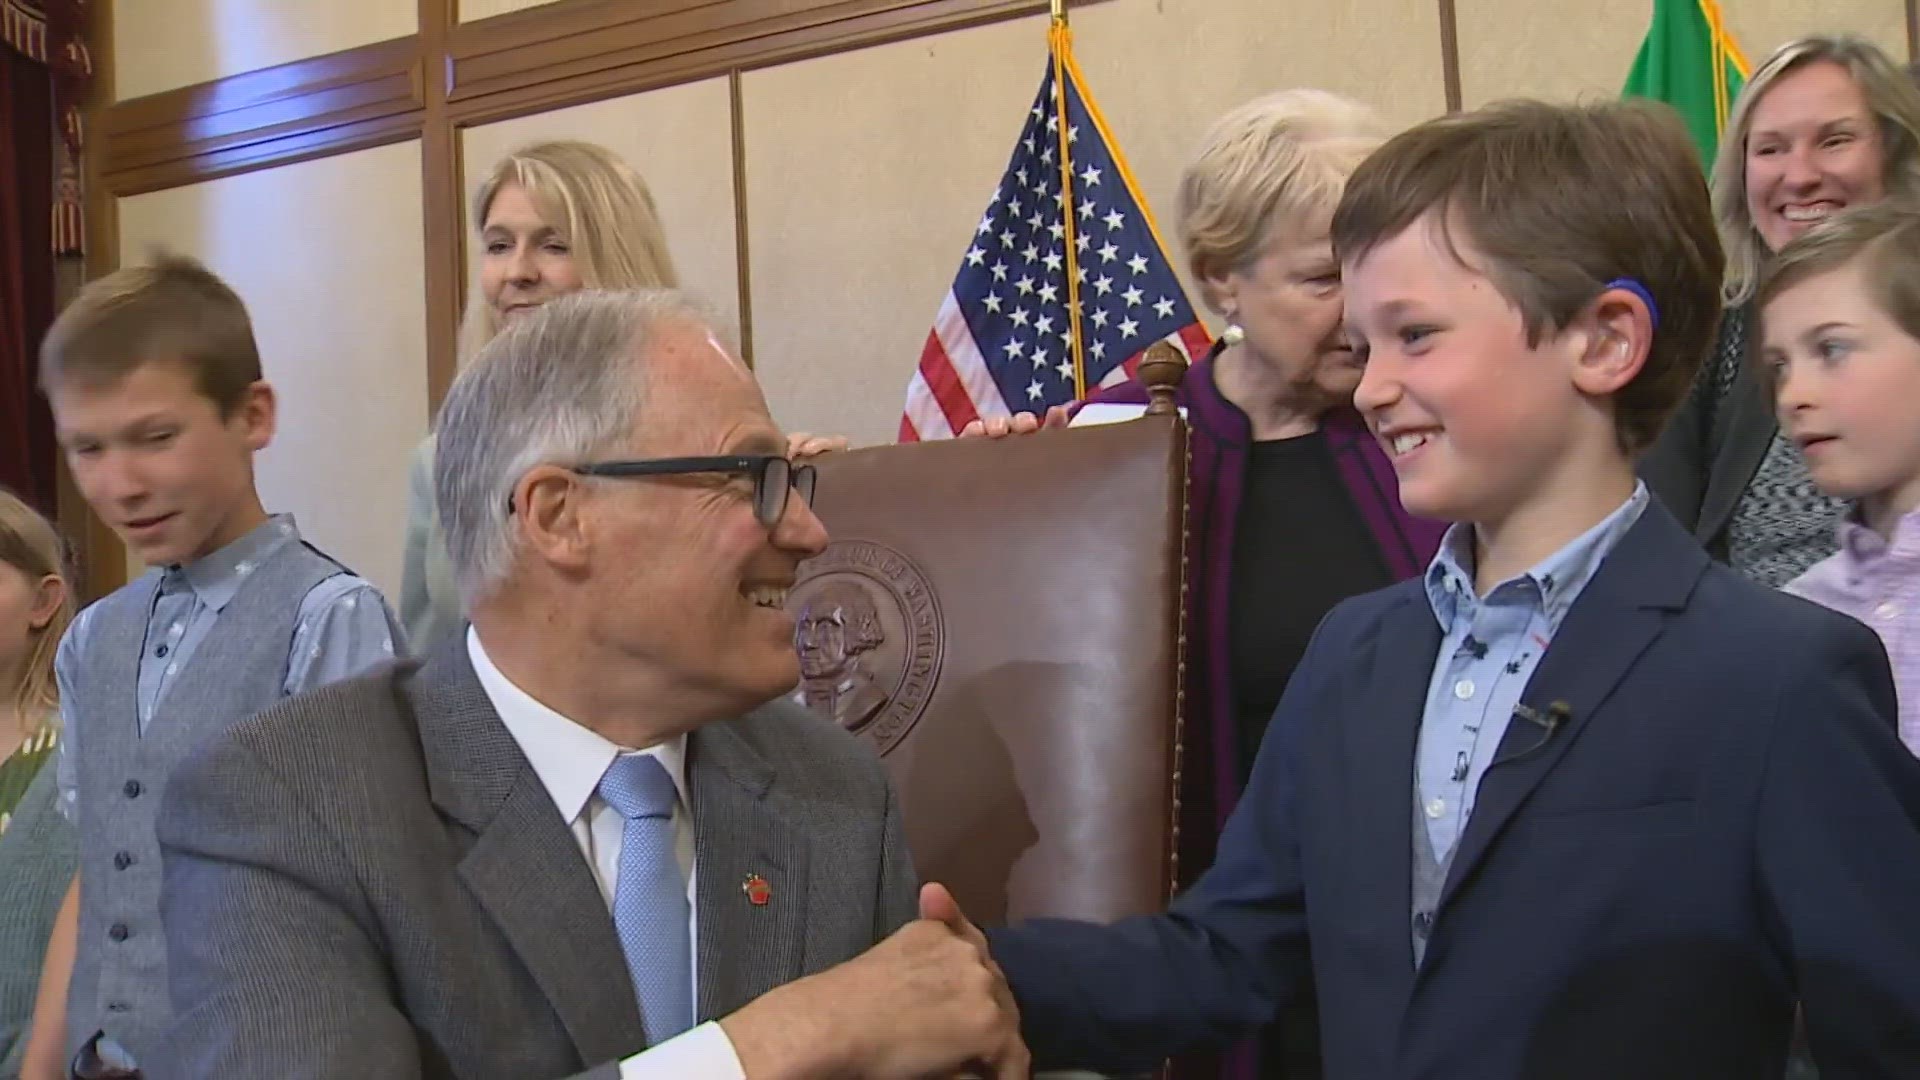 A new state law requires coverage of up to $5,000, for adults and children in no small part due to testimony from 8-year-old Hugo and his friends.